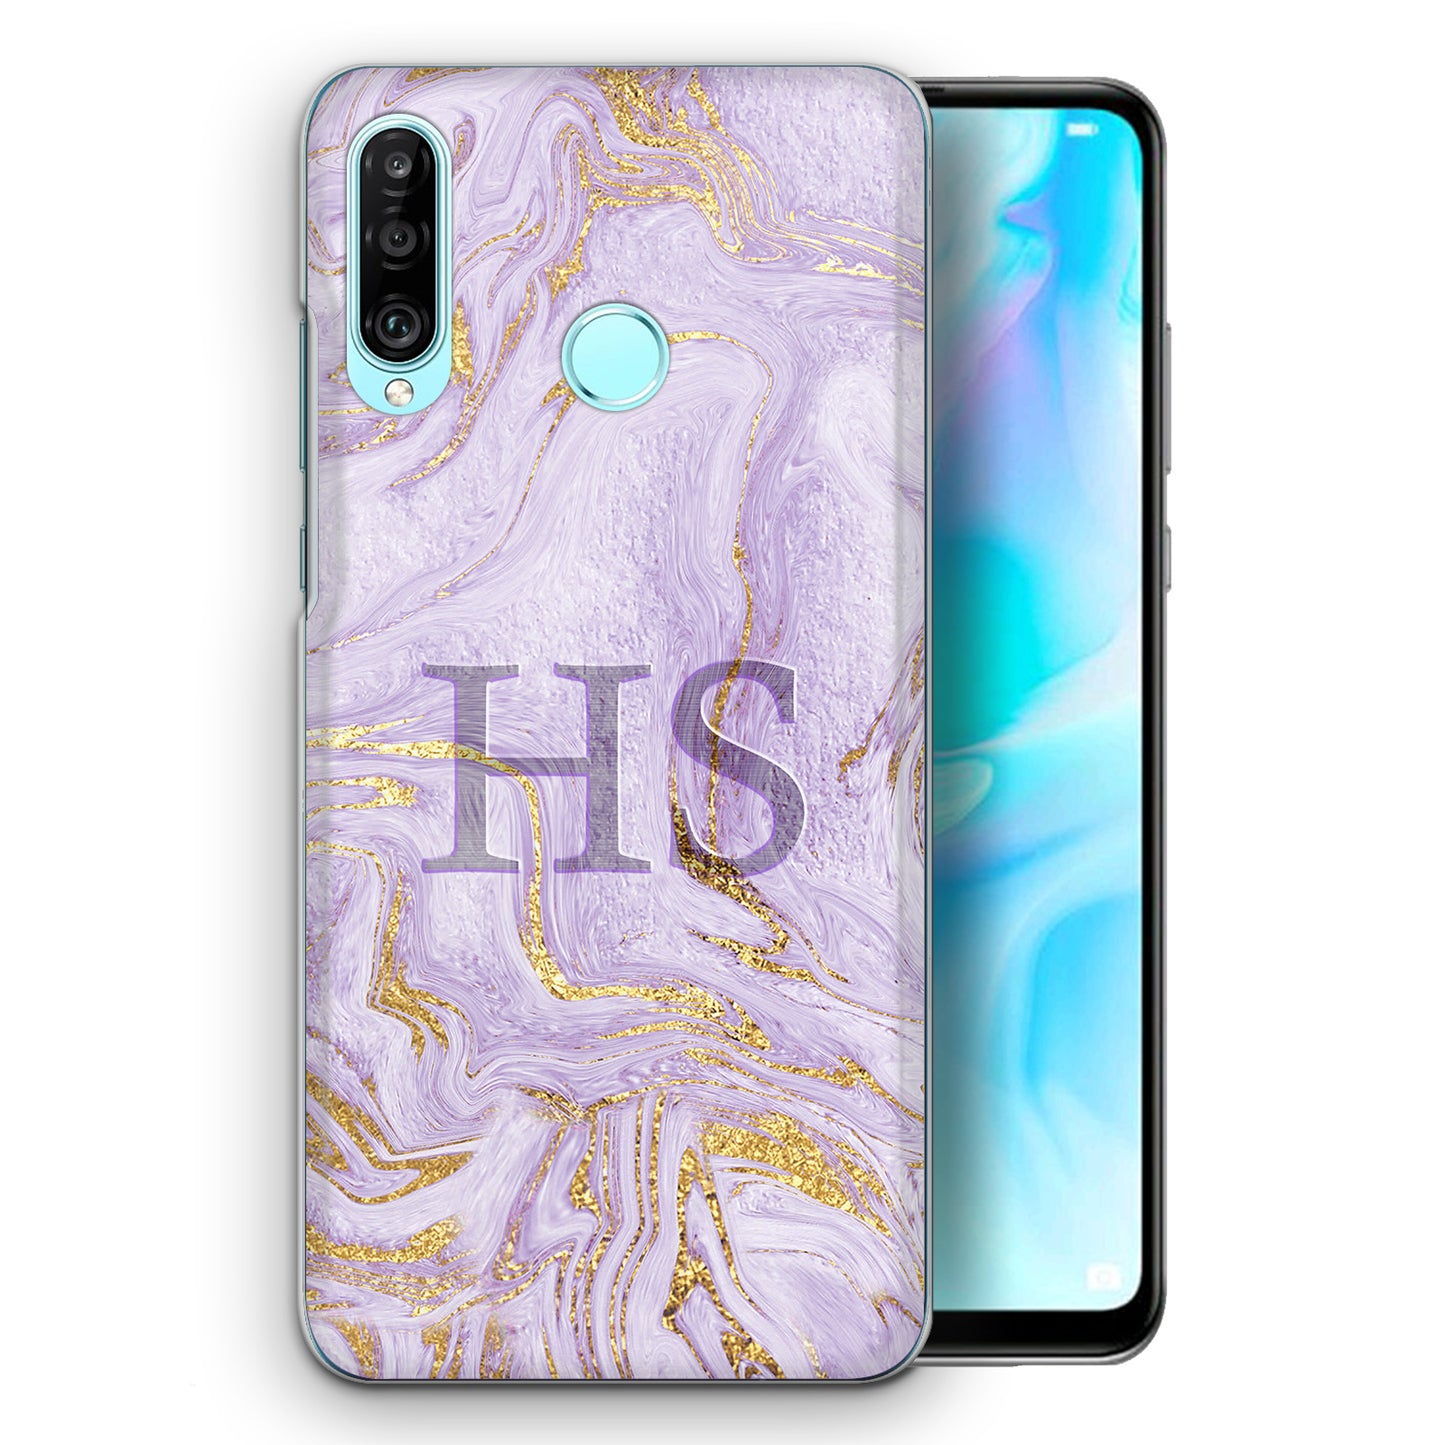 Personalised Honor Phone Hard Case with Soft Block Initials on Lilac and Gold Marble